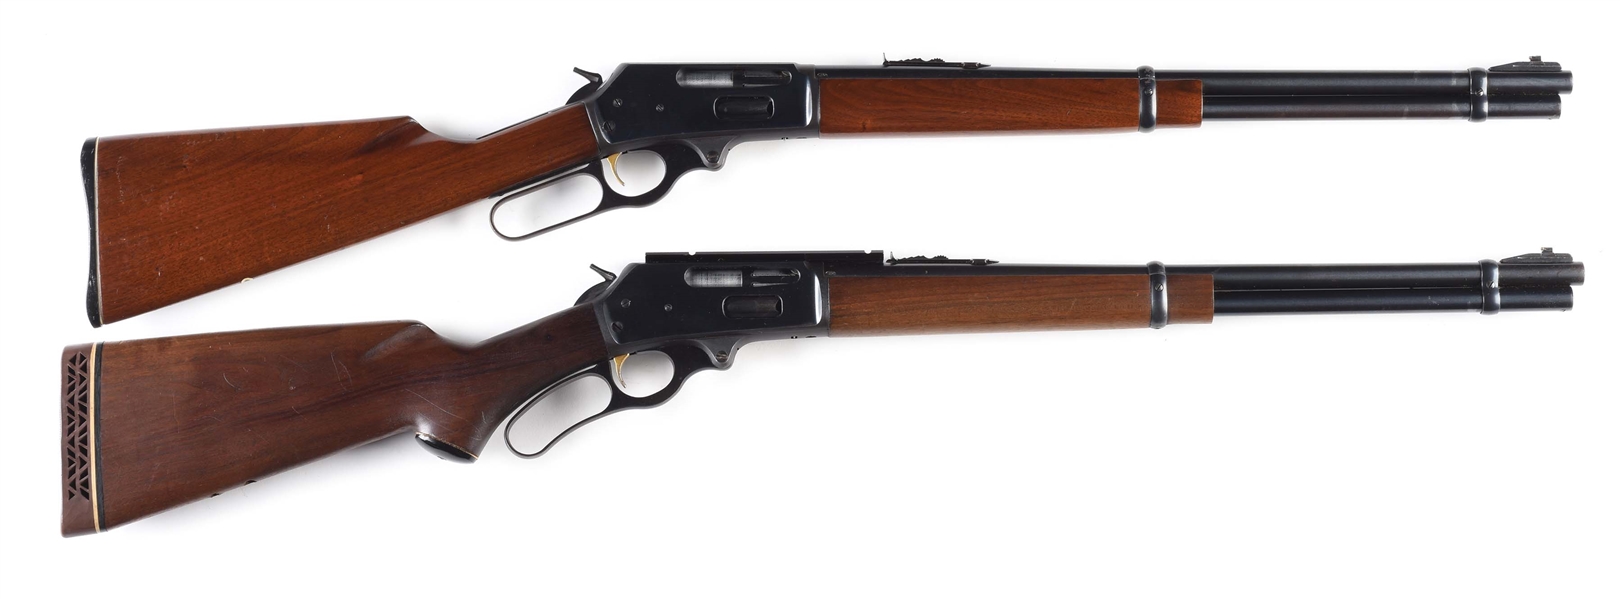 (M) LOT OF 2: MARLIN 336 LEVER ACTION RIFLES.